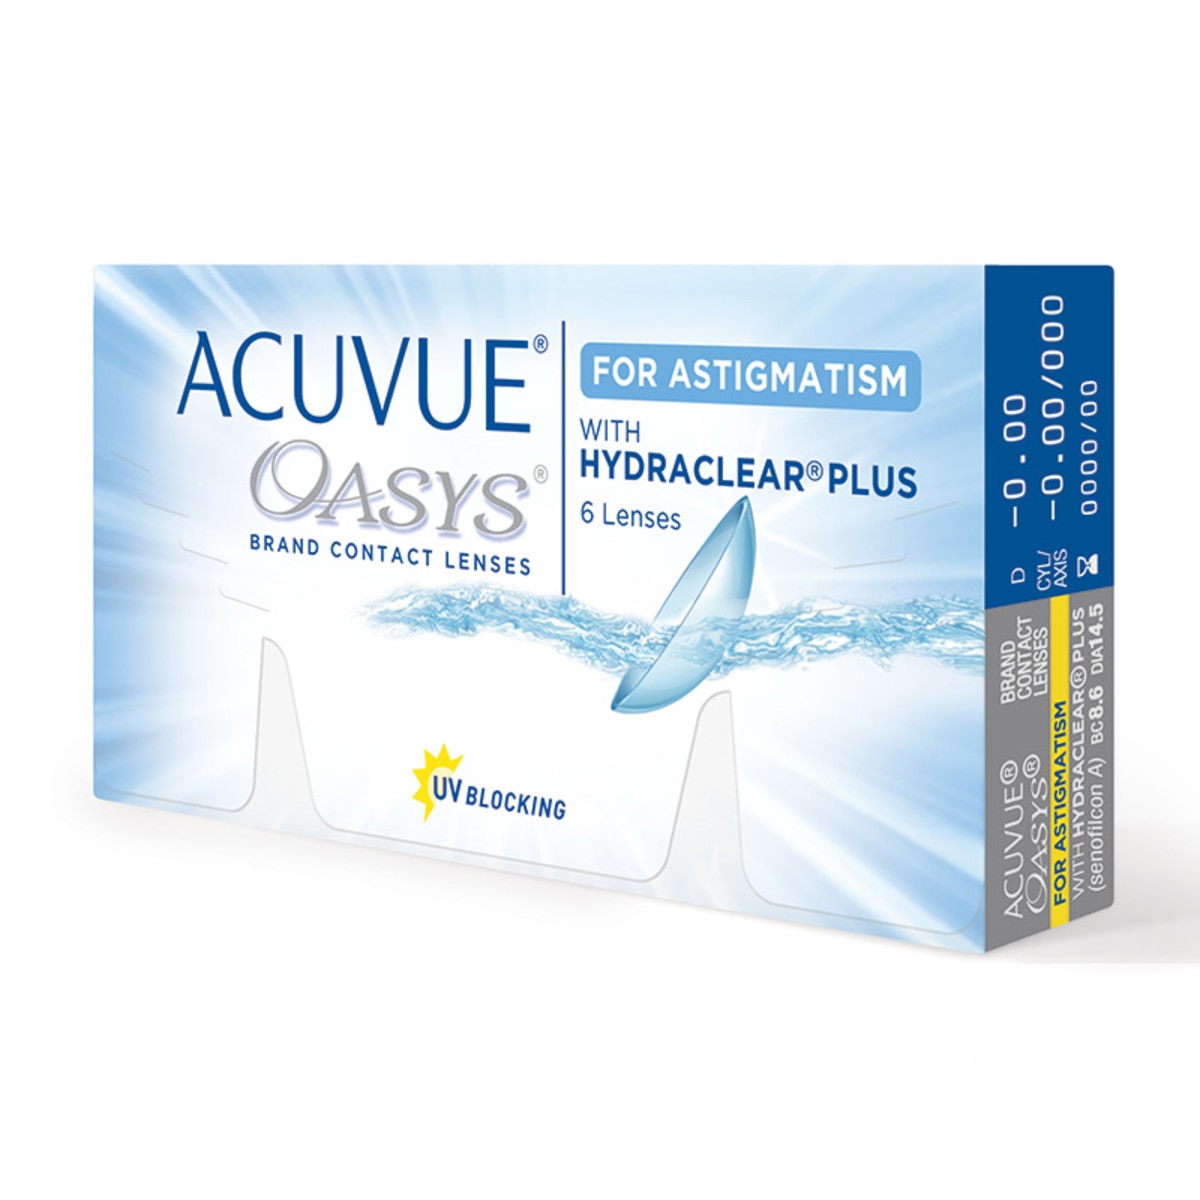 ACUVUE OASYS® con HYDRACLEAR Plus® para Astigmatismo (D -3.25, Cyl/Axis -1.75/150)